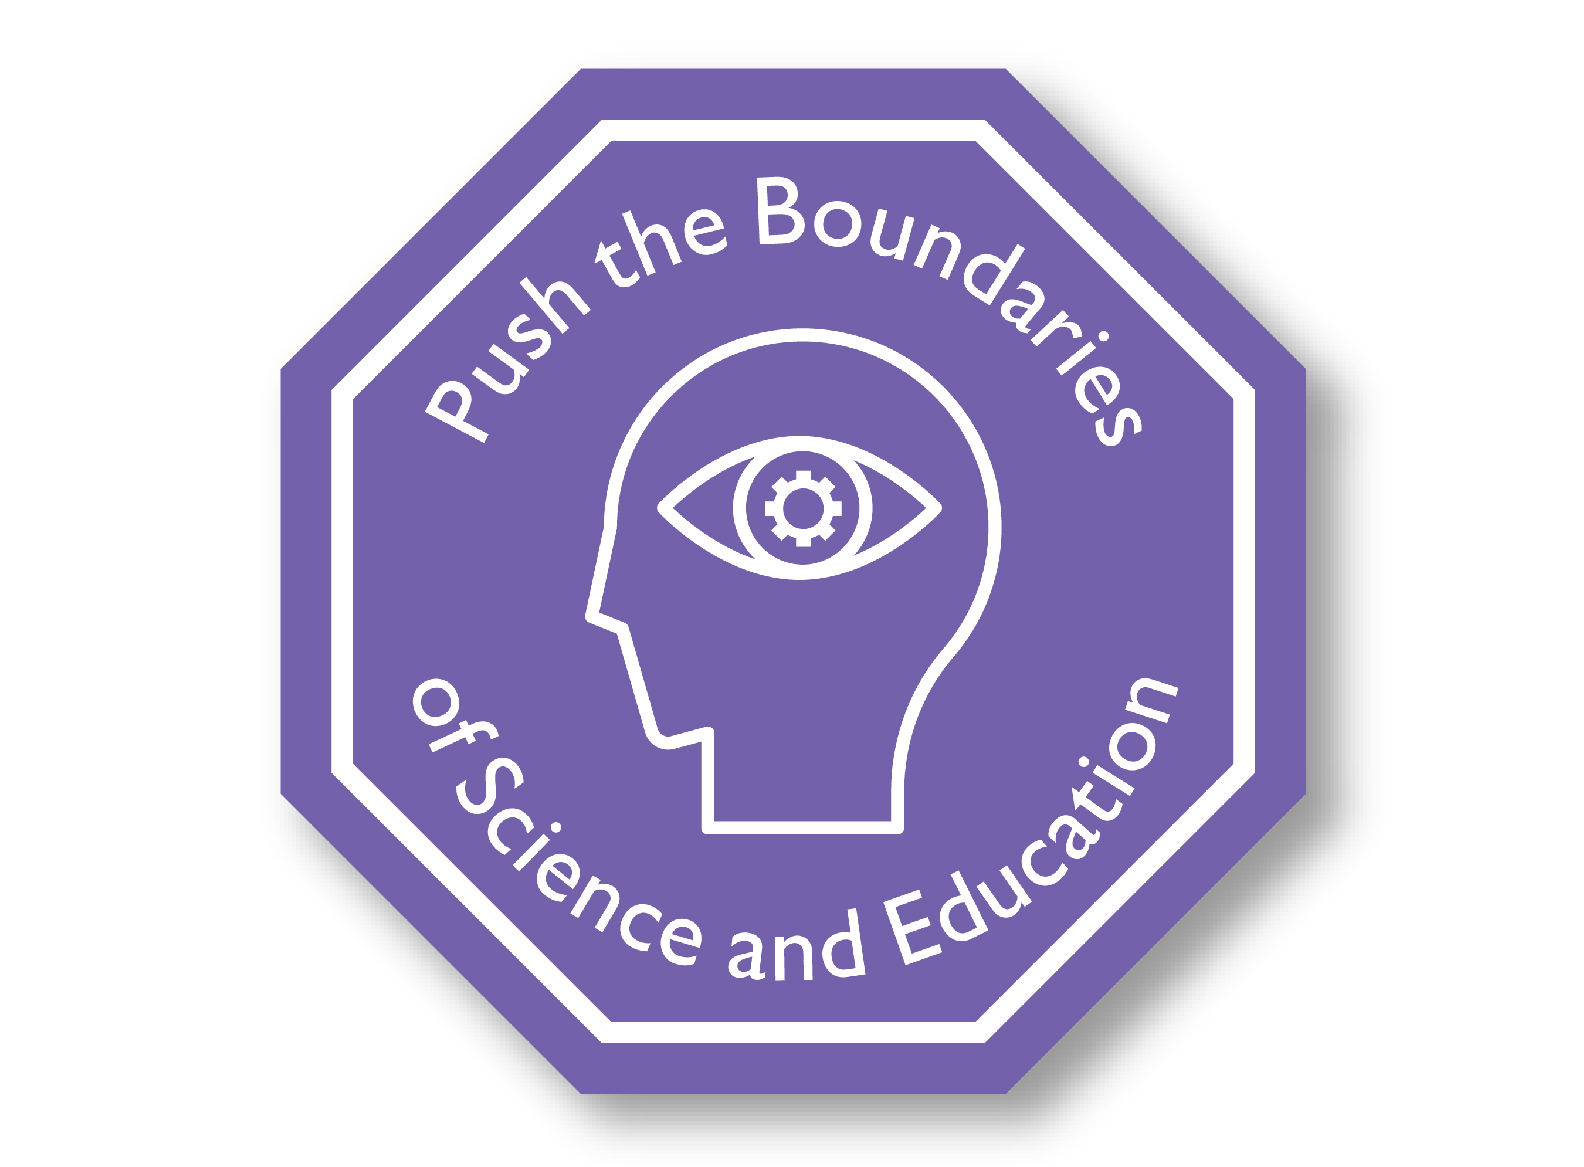 Push the Boundaries of Science and Education